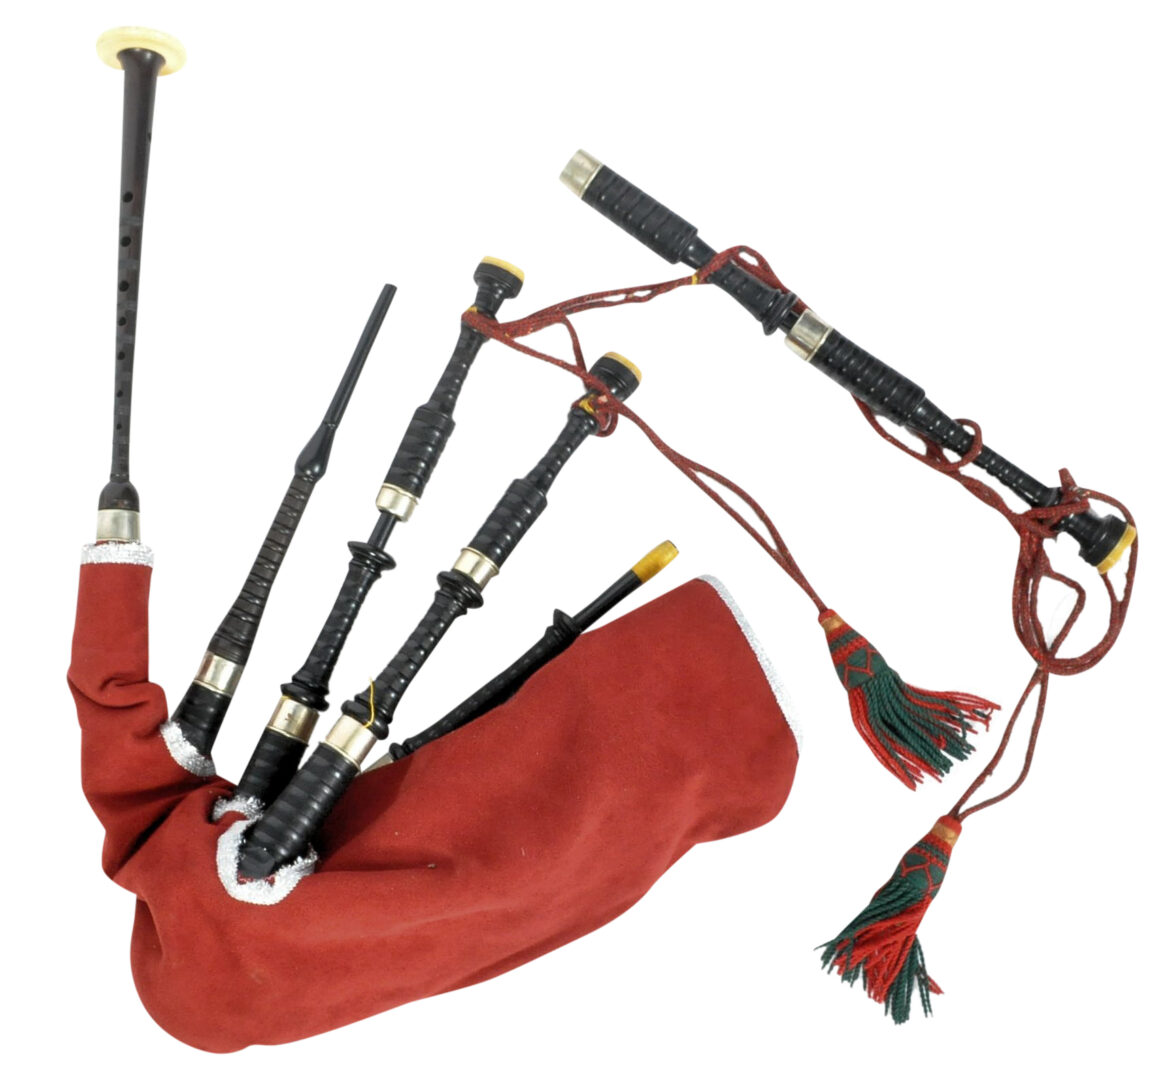 Bagpipe Central - AUCTION - Lawrie Made Scottish Highland Pipes